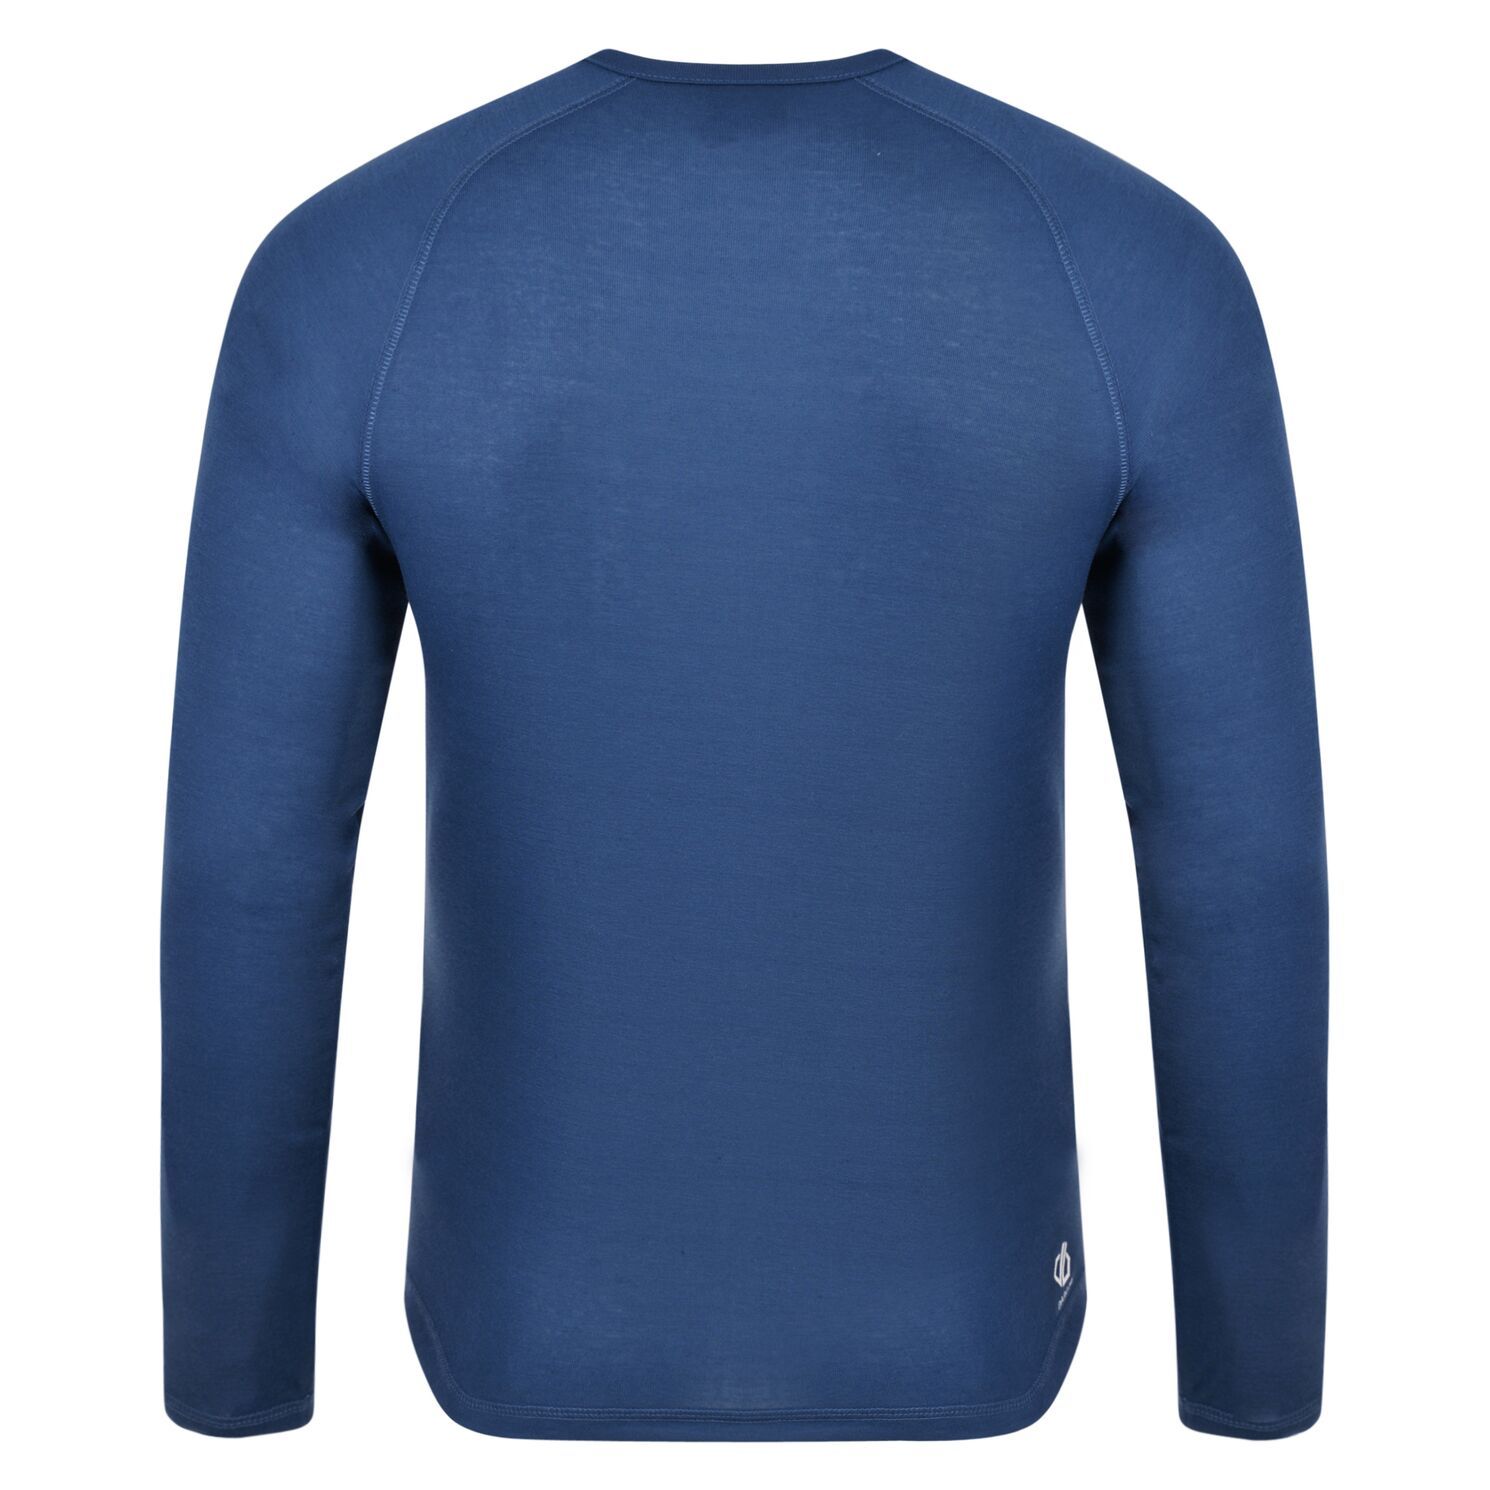 Material: polyester: 100%. Thermal base layer collection. Q-Wic Plus 100% polyester brushed back thermal fabric. Fast wicking and quick drying properties. Odour control treatment. Moves moisture away from the skin and absorbs odour. Keeps you feeling warm and fresh.